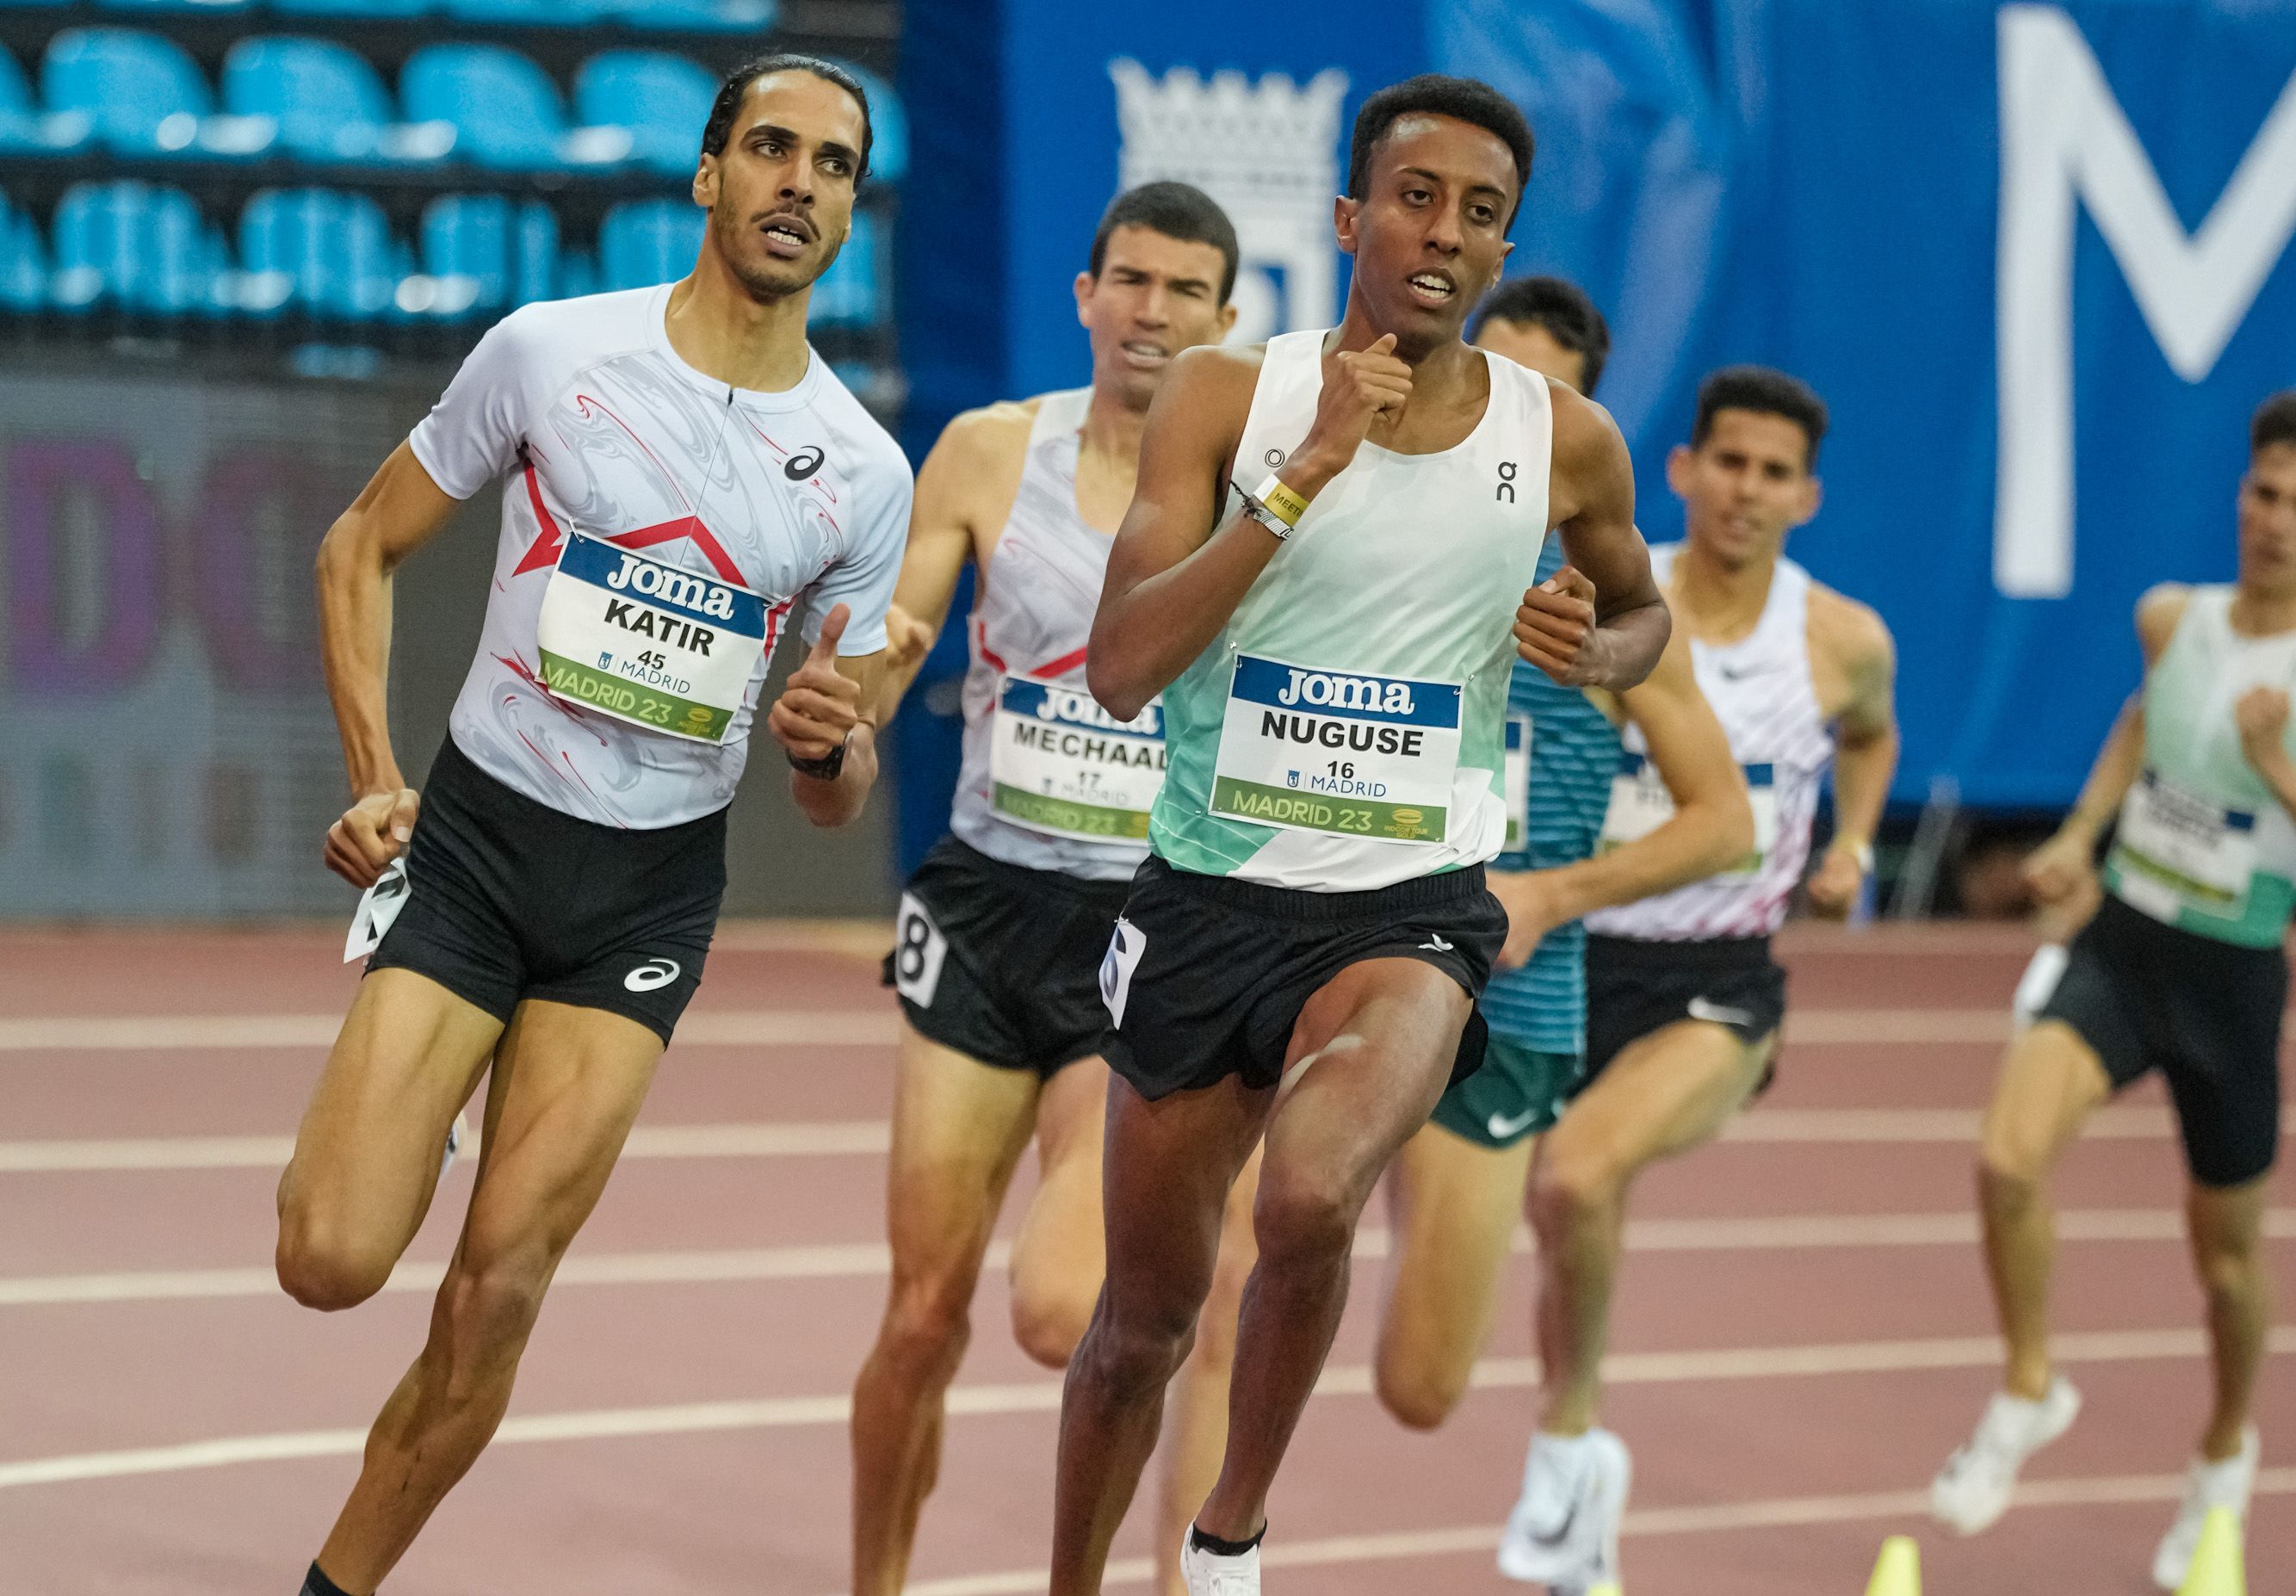 Yared Nuguse maintains his win streak with 1500m victory in Madrid